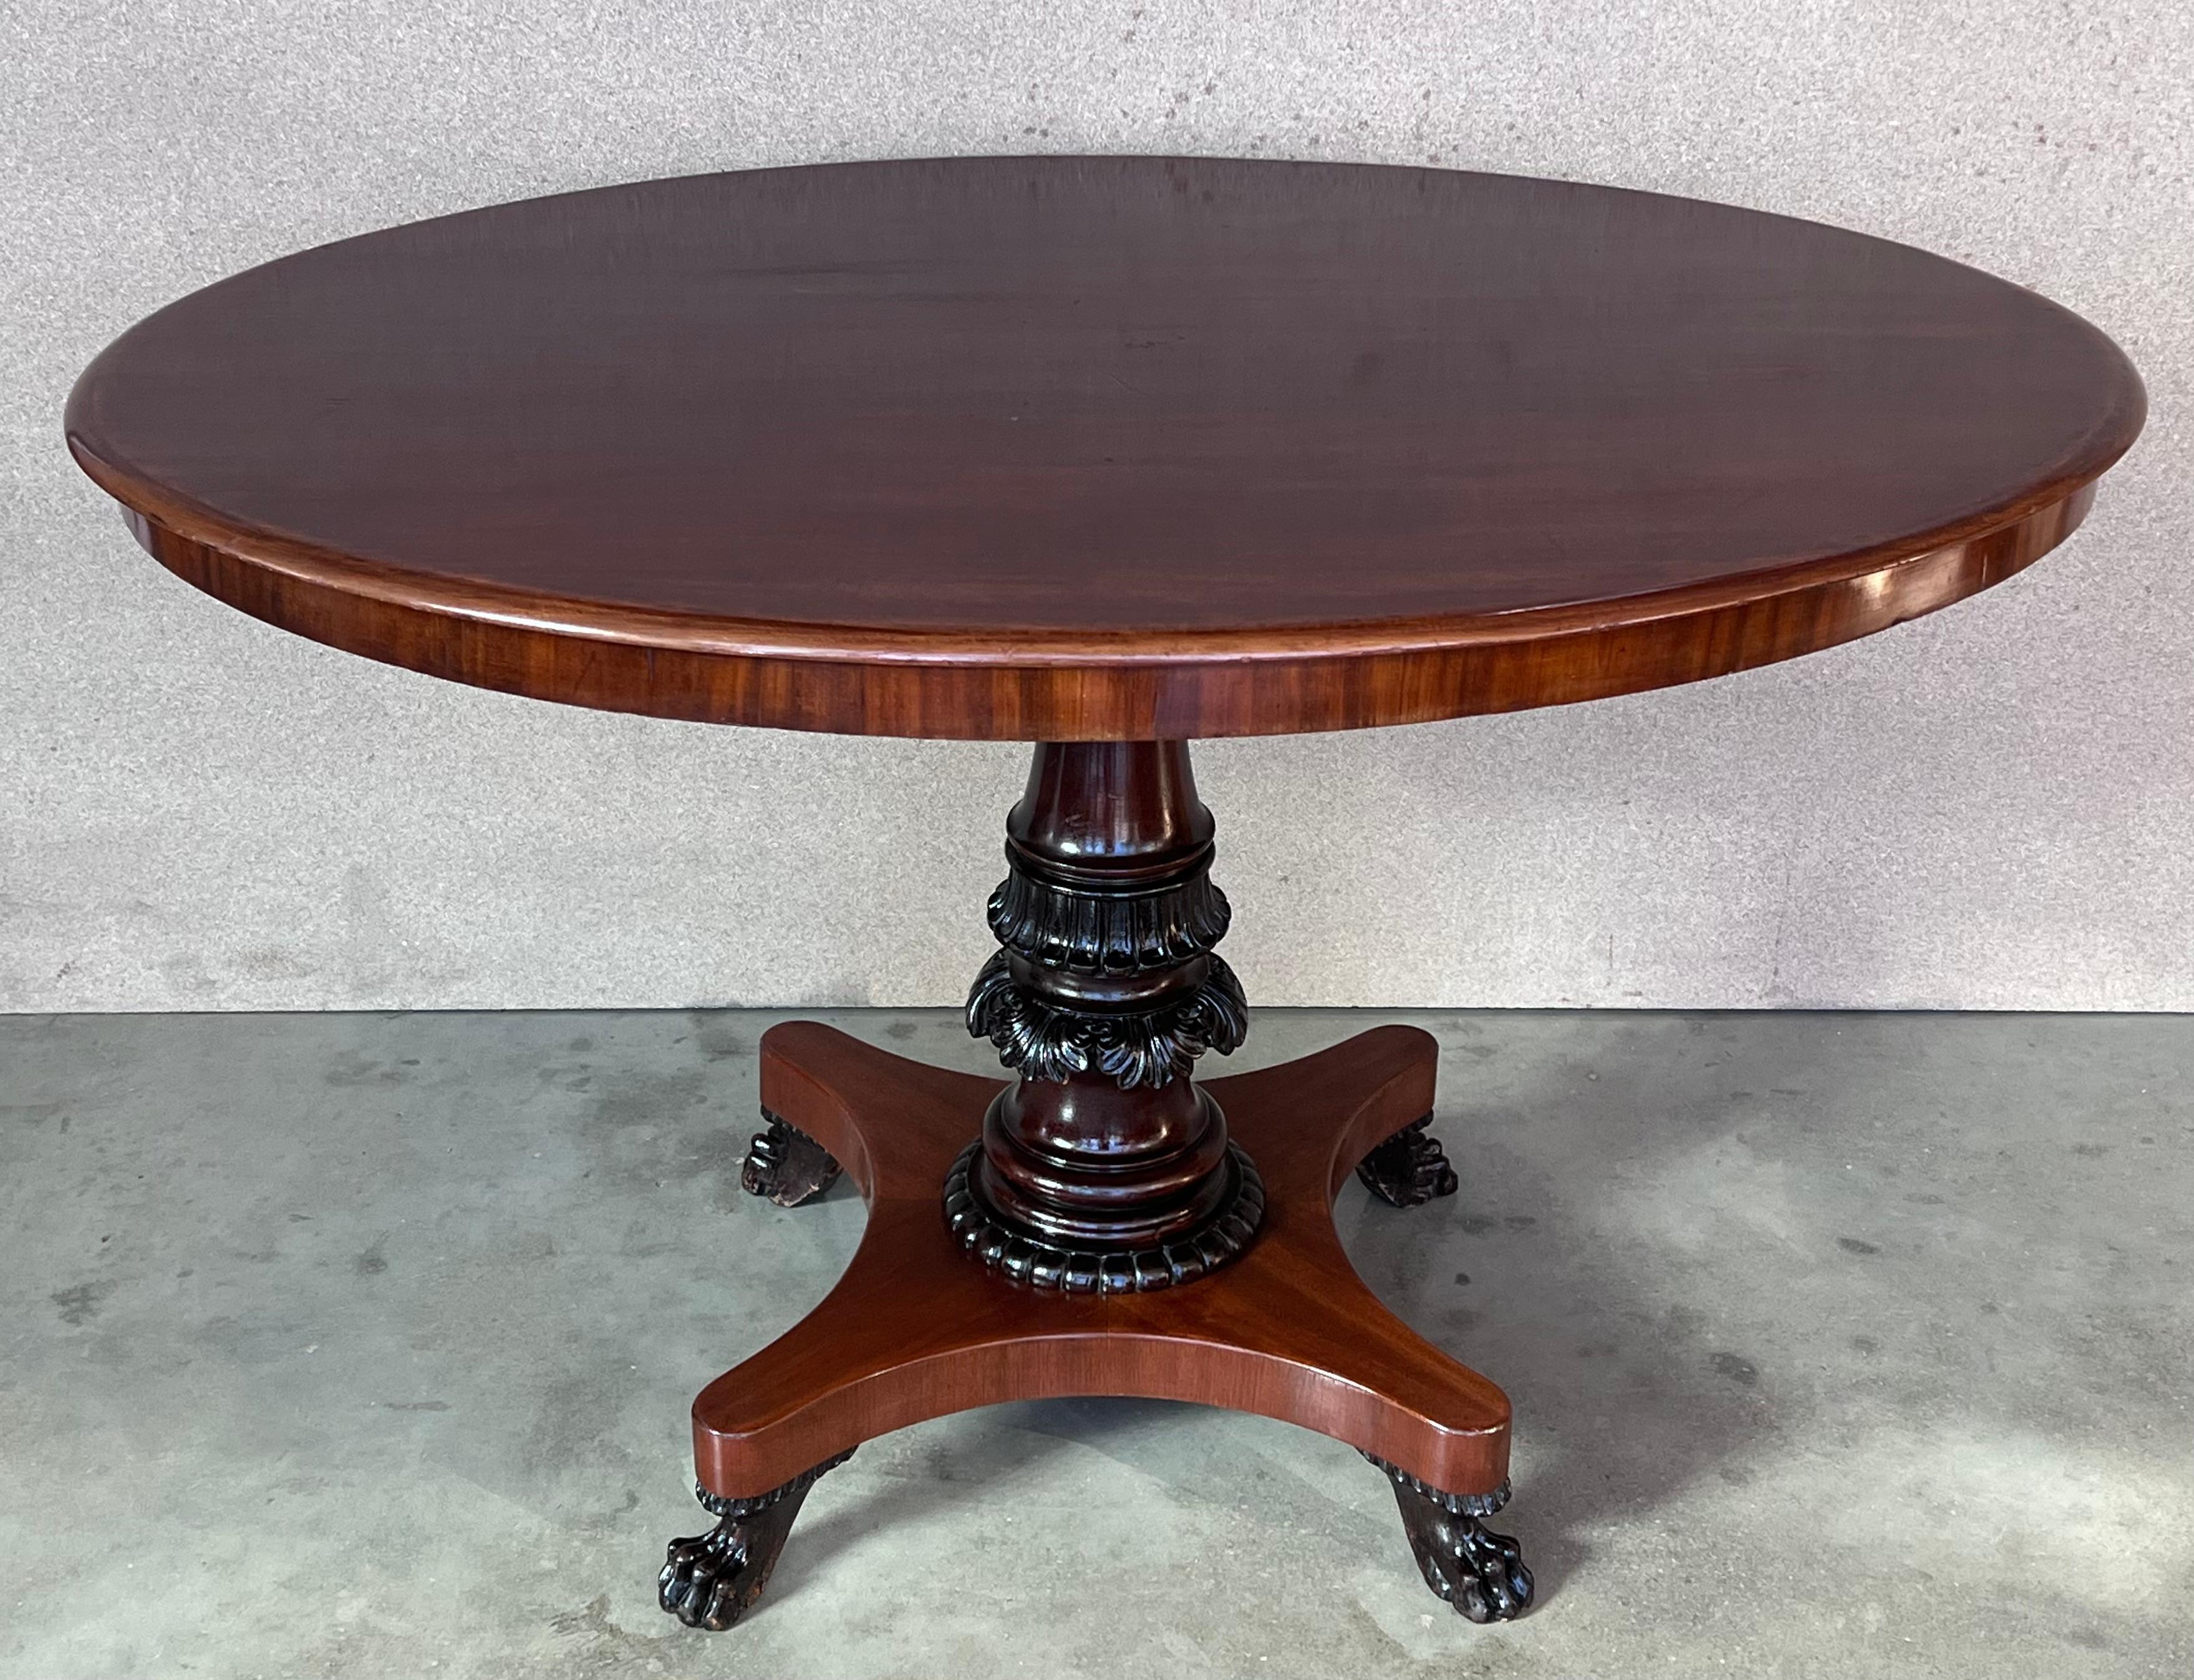 We present you this piece of furniture made of solid mahogany wood and partially veneered with pyramidal mahogany. The whole is dated the second half of the 19th century. The oval table top is supported on a massive, turned and carved pedestal,